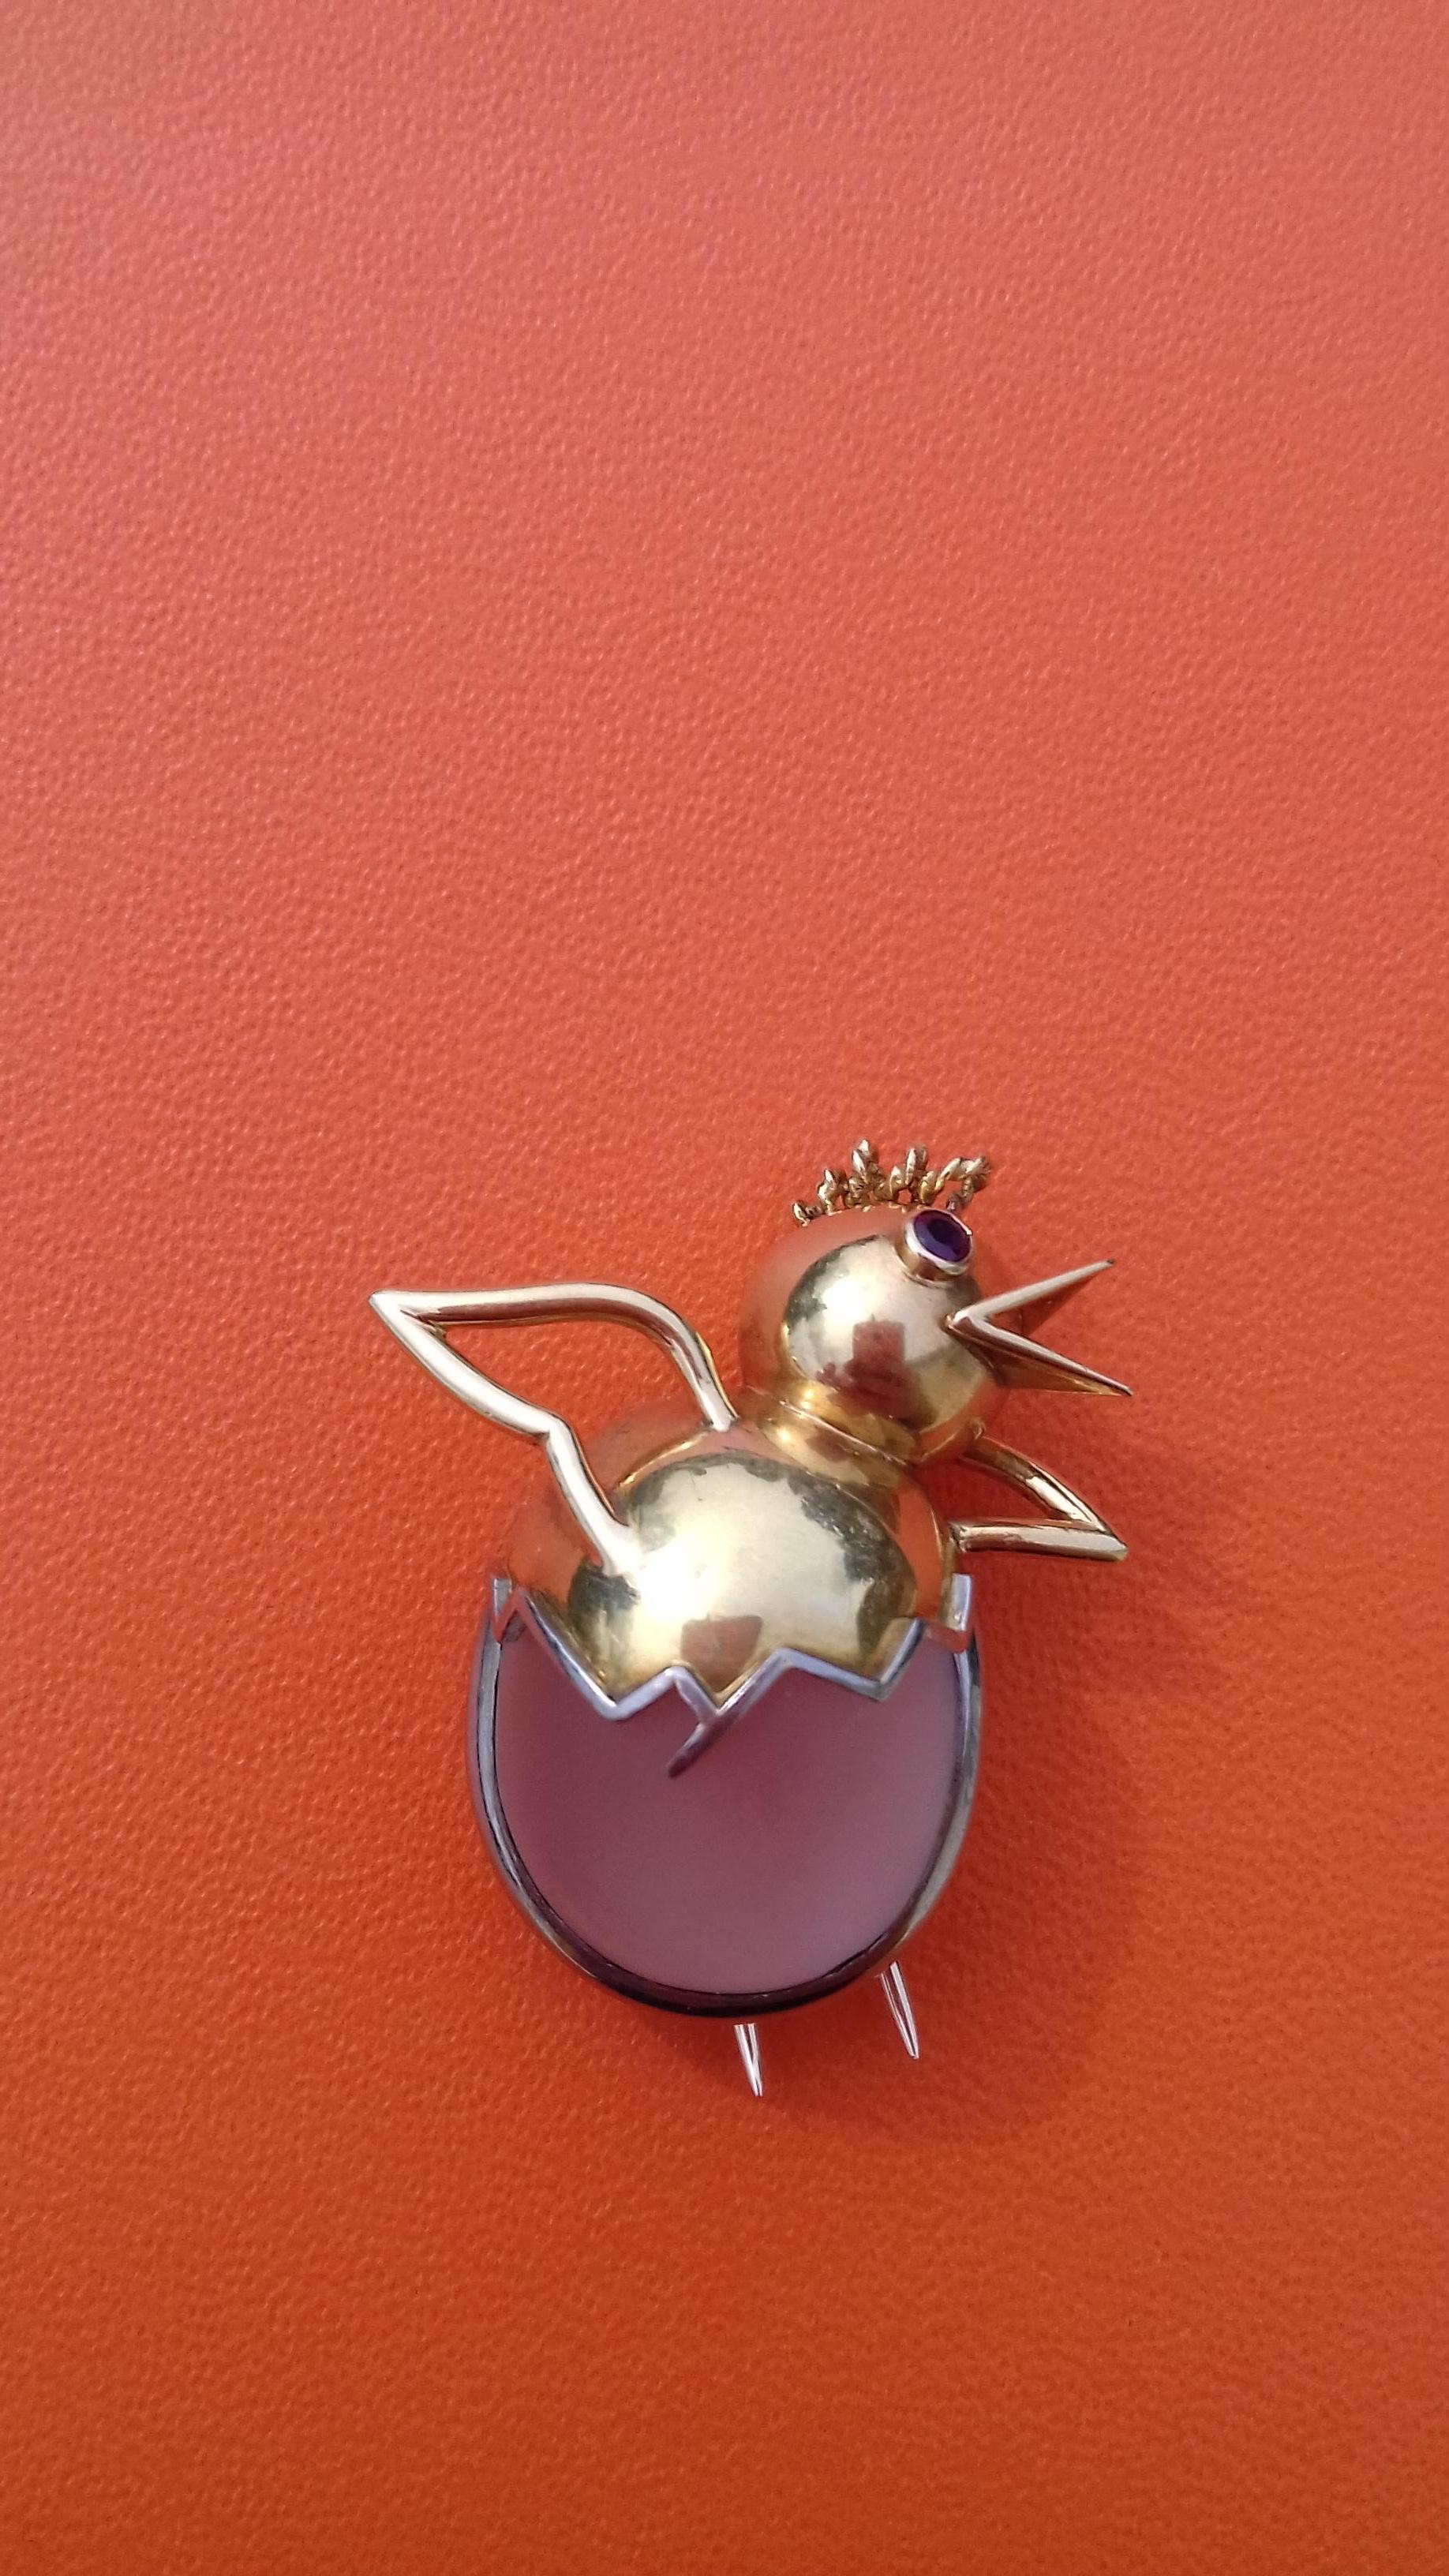 Adorable Authentic Hermès Brooch

In shape of a Chick coming out of its eggshell

Made in France in the 60's

Made of yellow and grey gold

The eggshell is formed of a frosted glass paste cabochon surrounded by a grey gold thread

The chick is made